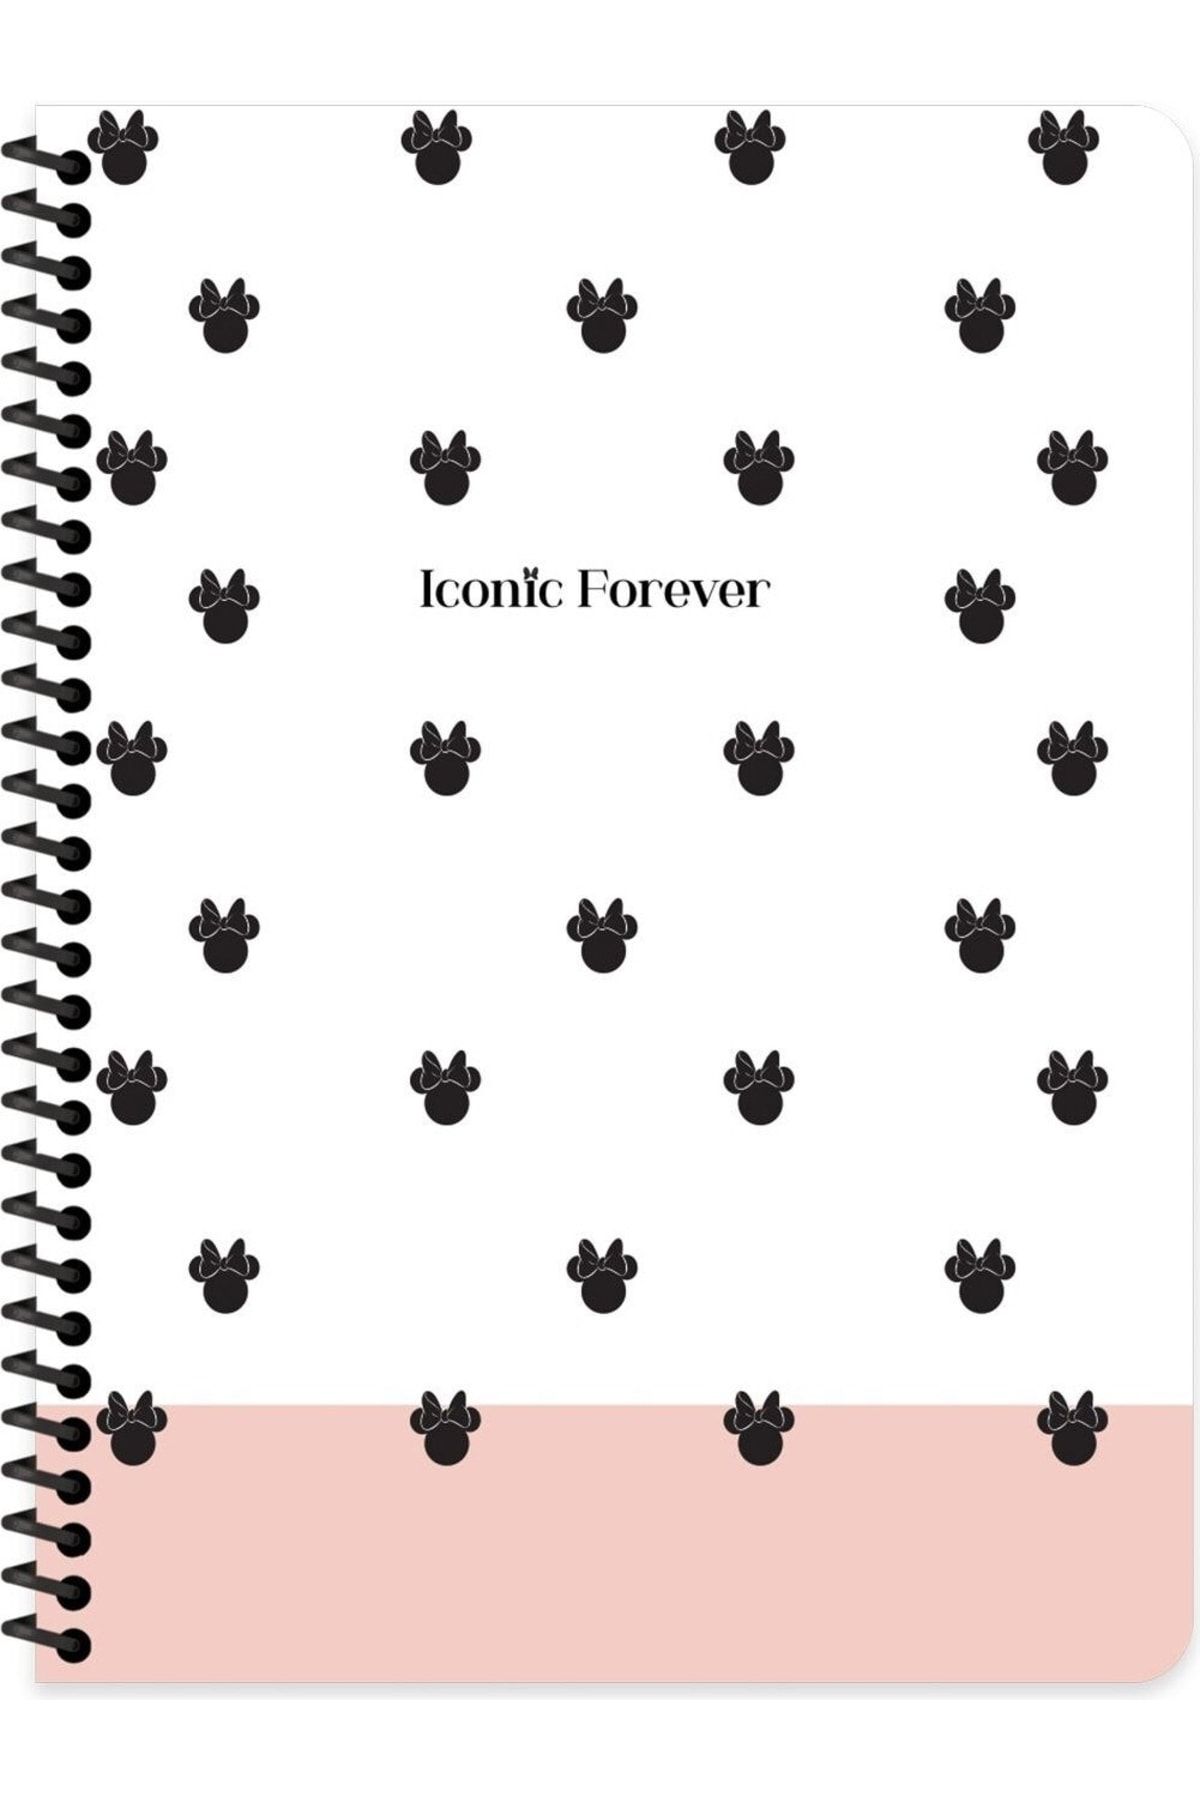 MINNIE MOUSE 16.5x22.5 Kareli Defter - Iconic Forever (80 Yaprak)